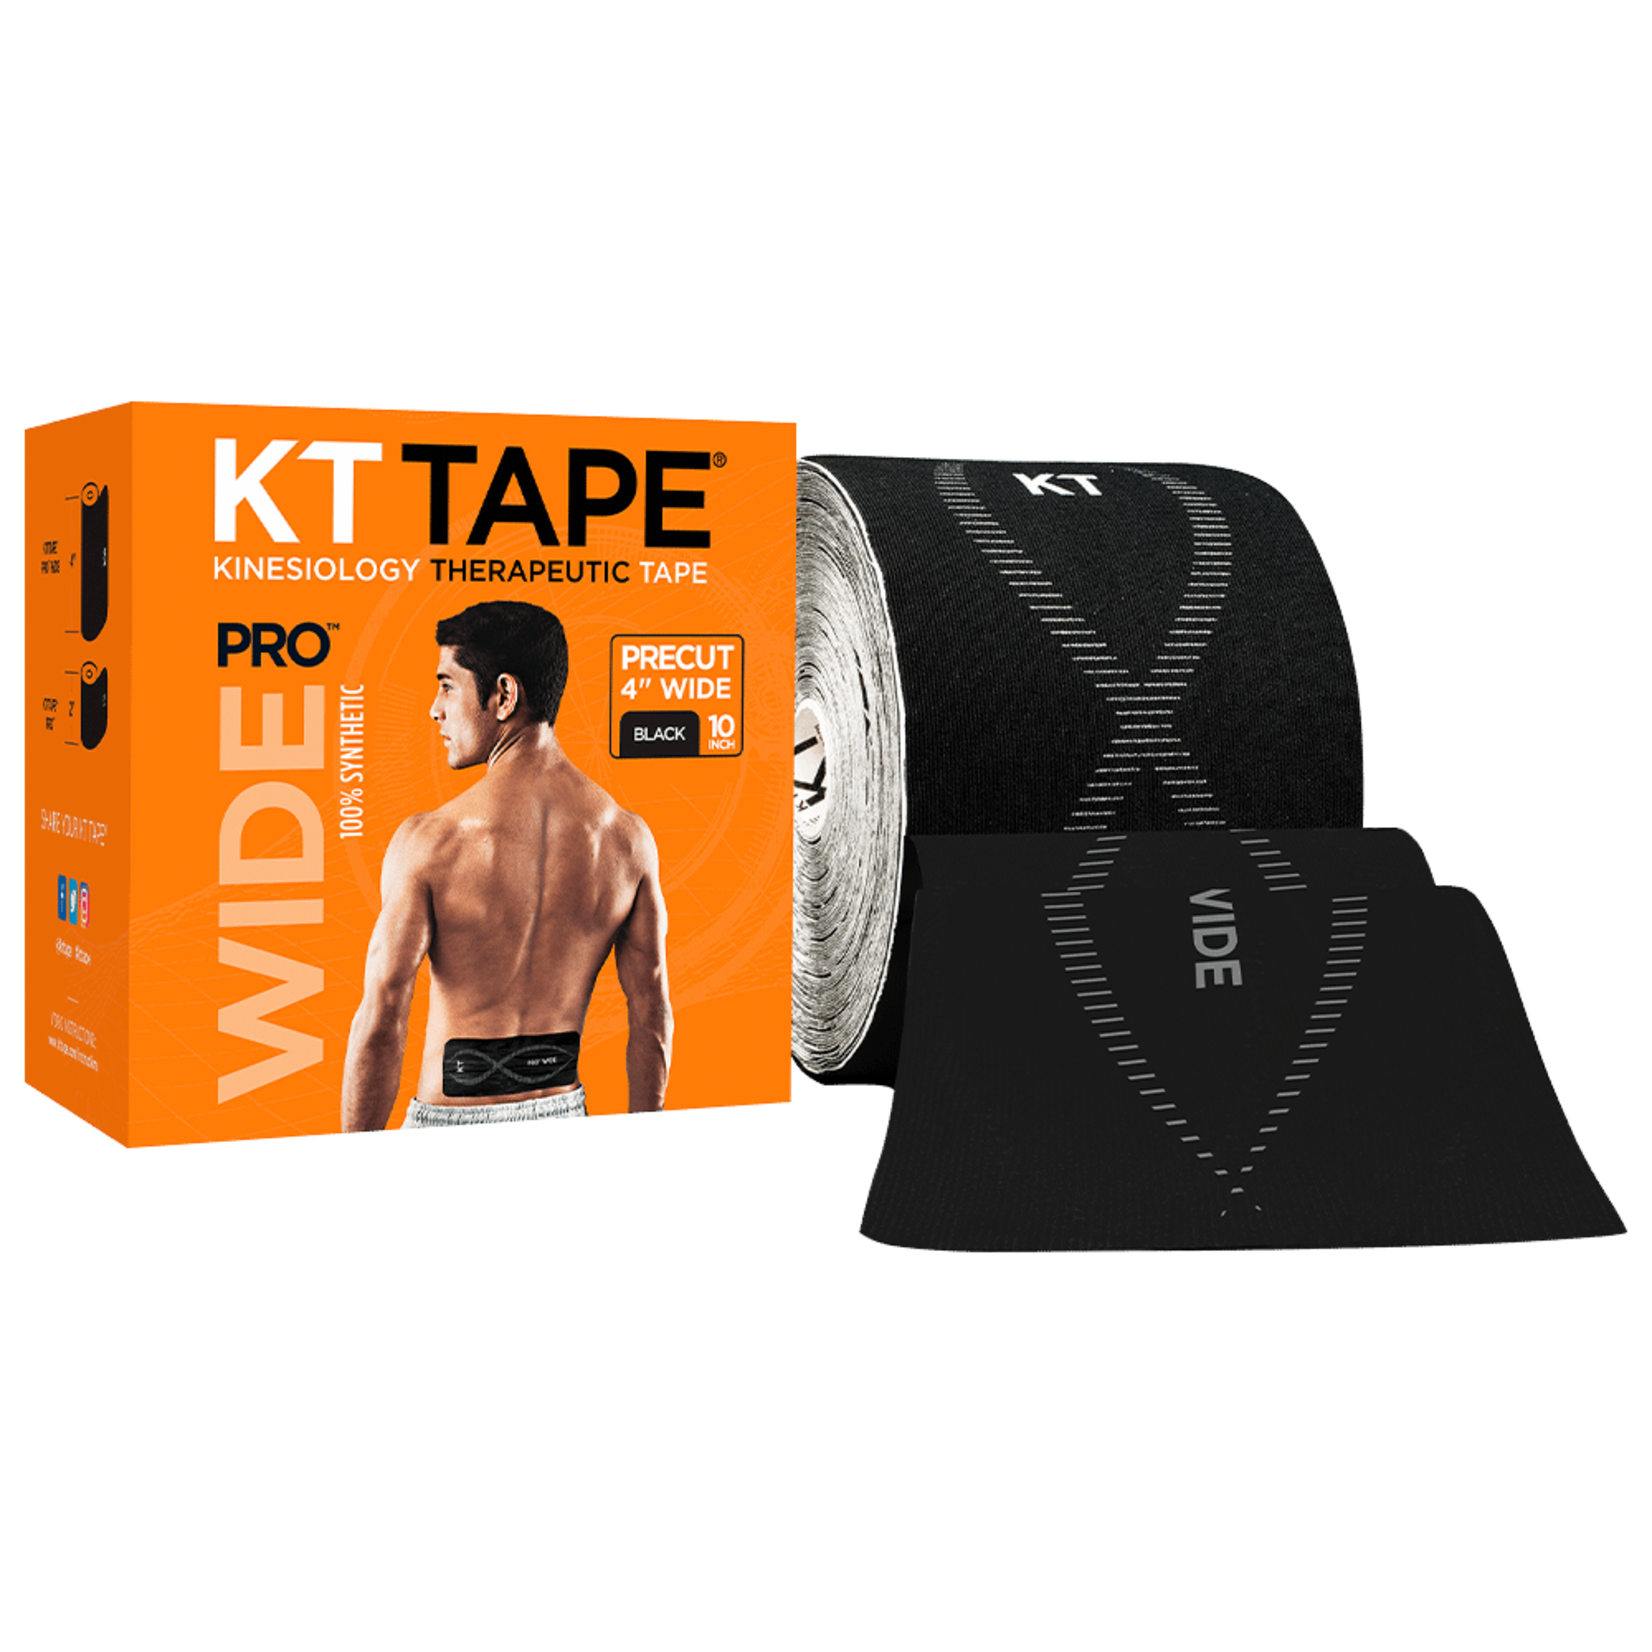 KT Tape KT Kinesiology Therapeutic Tape, Pro Wide, Jet Blk